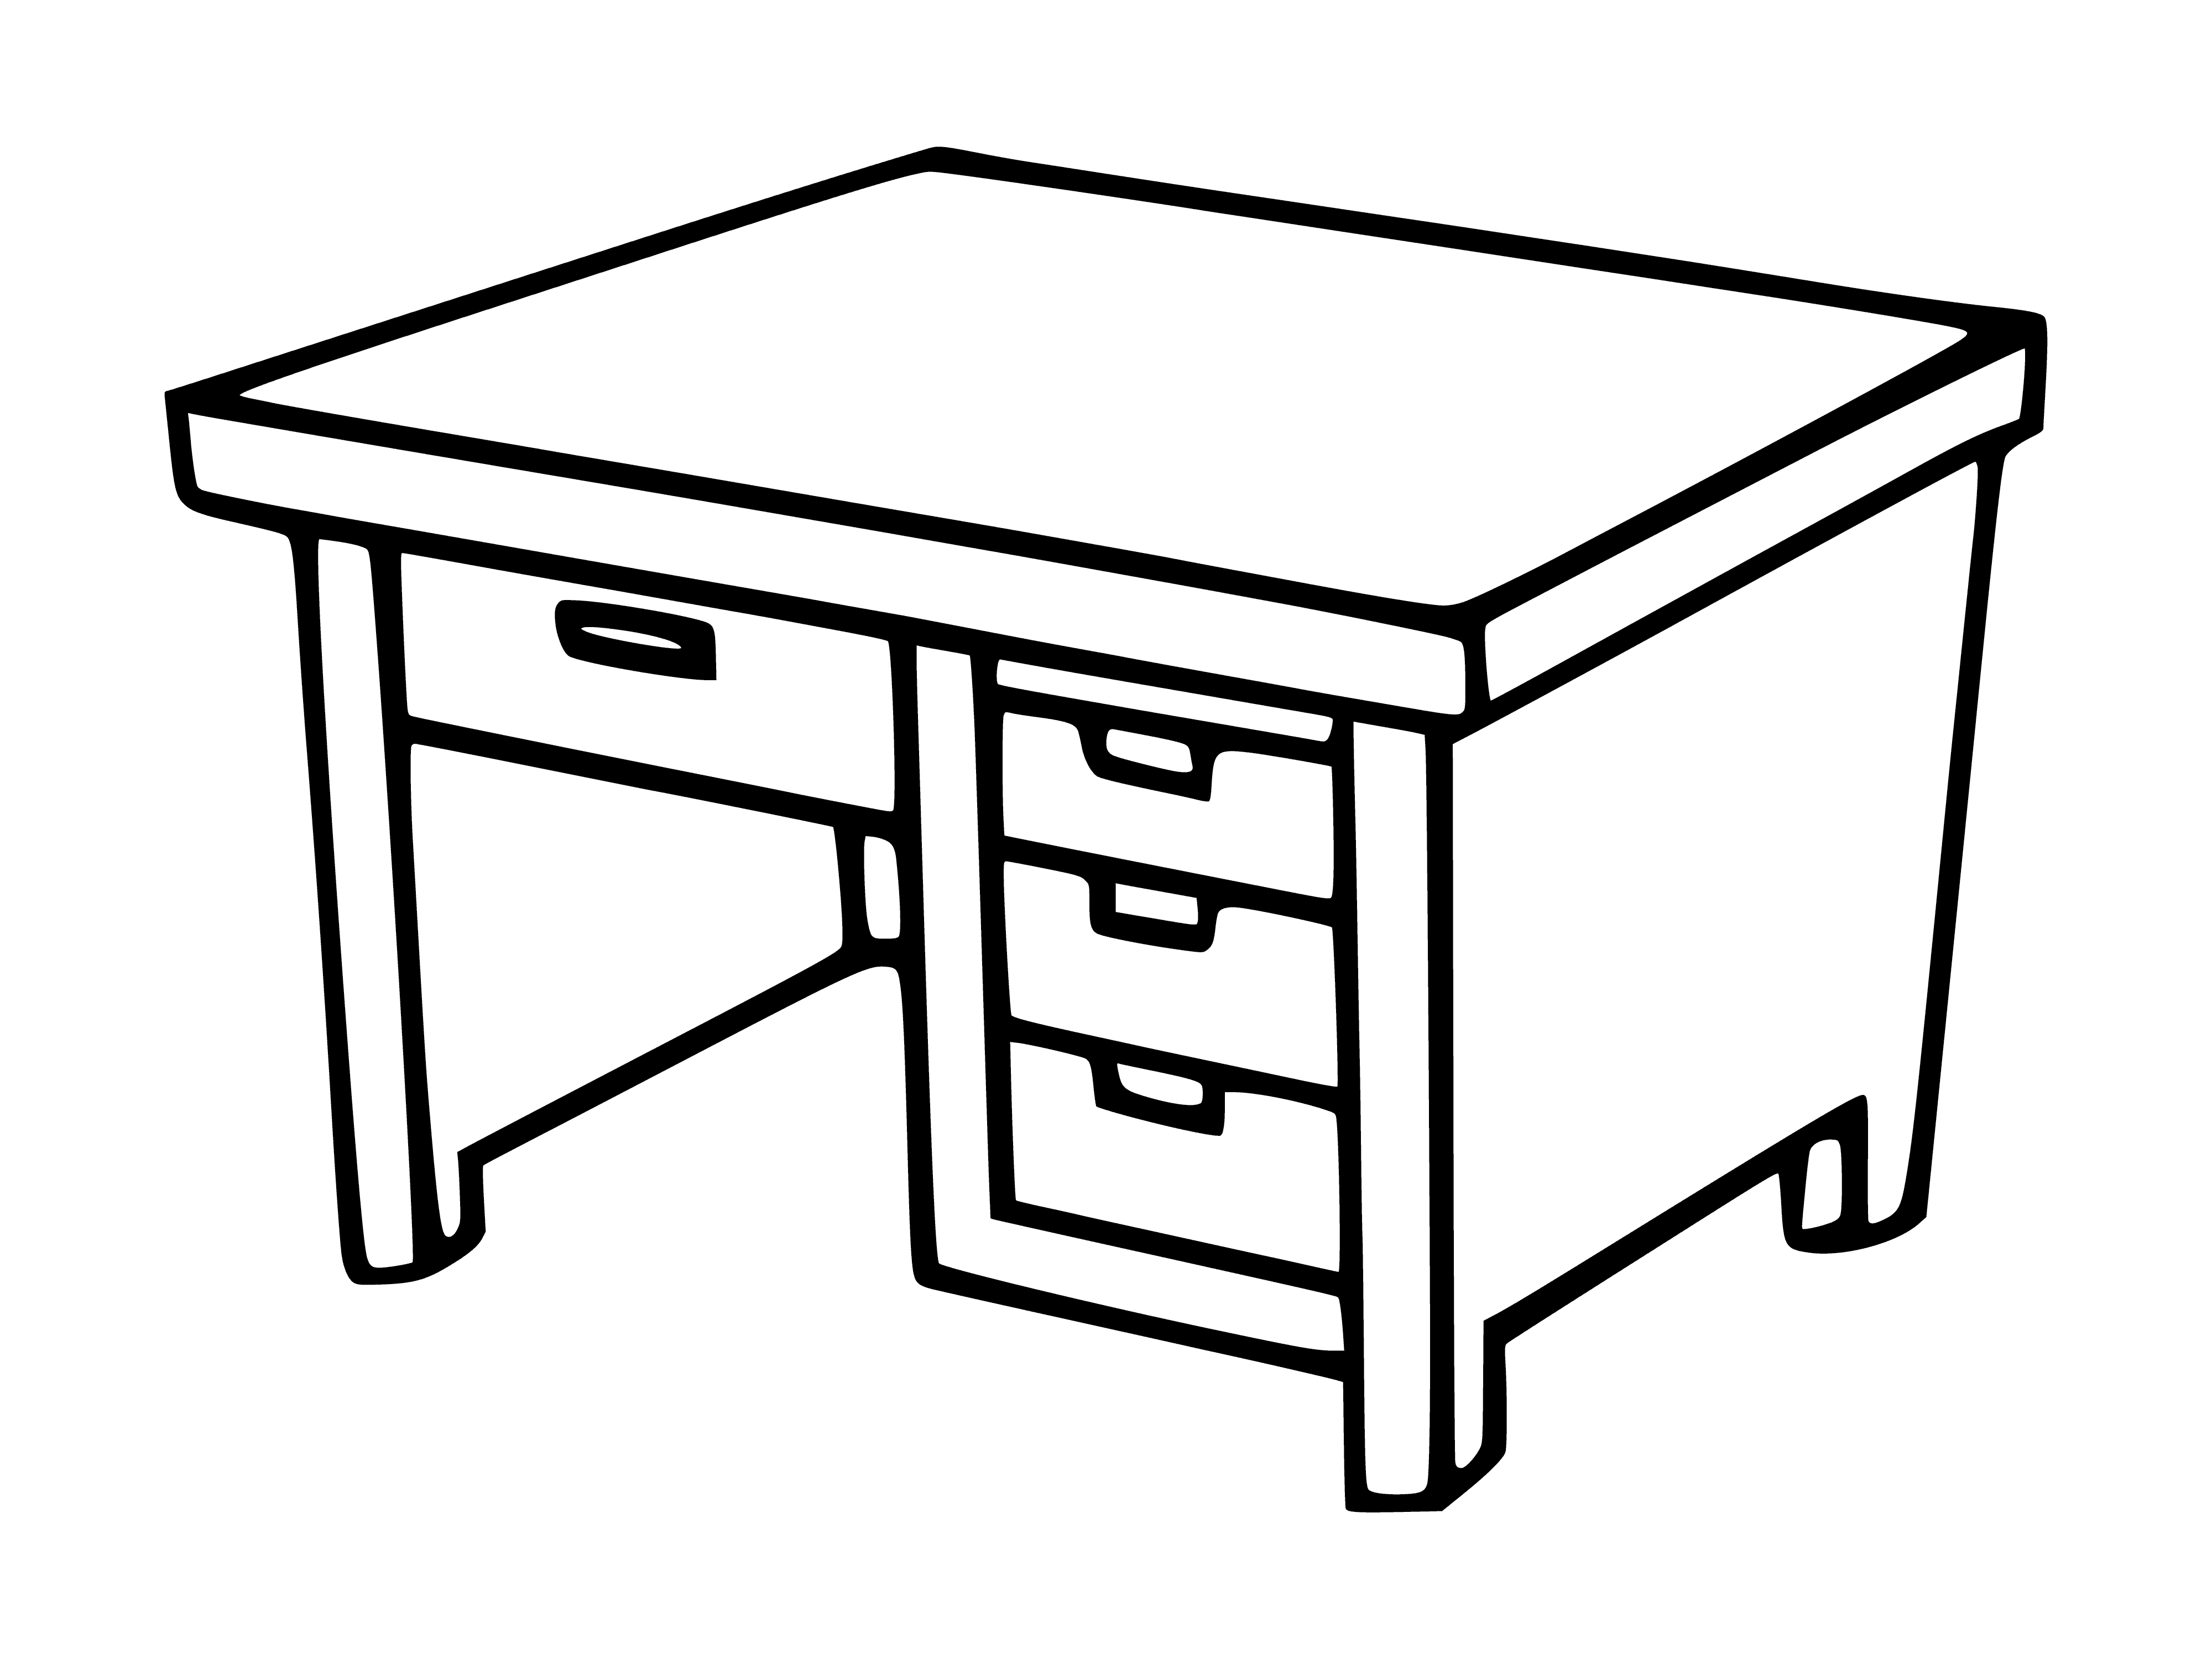 Drawer table coloring page